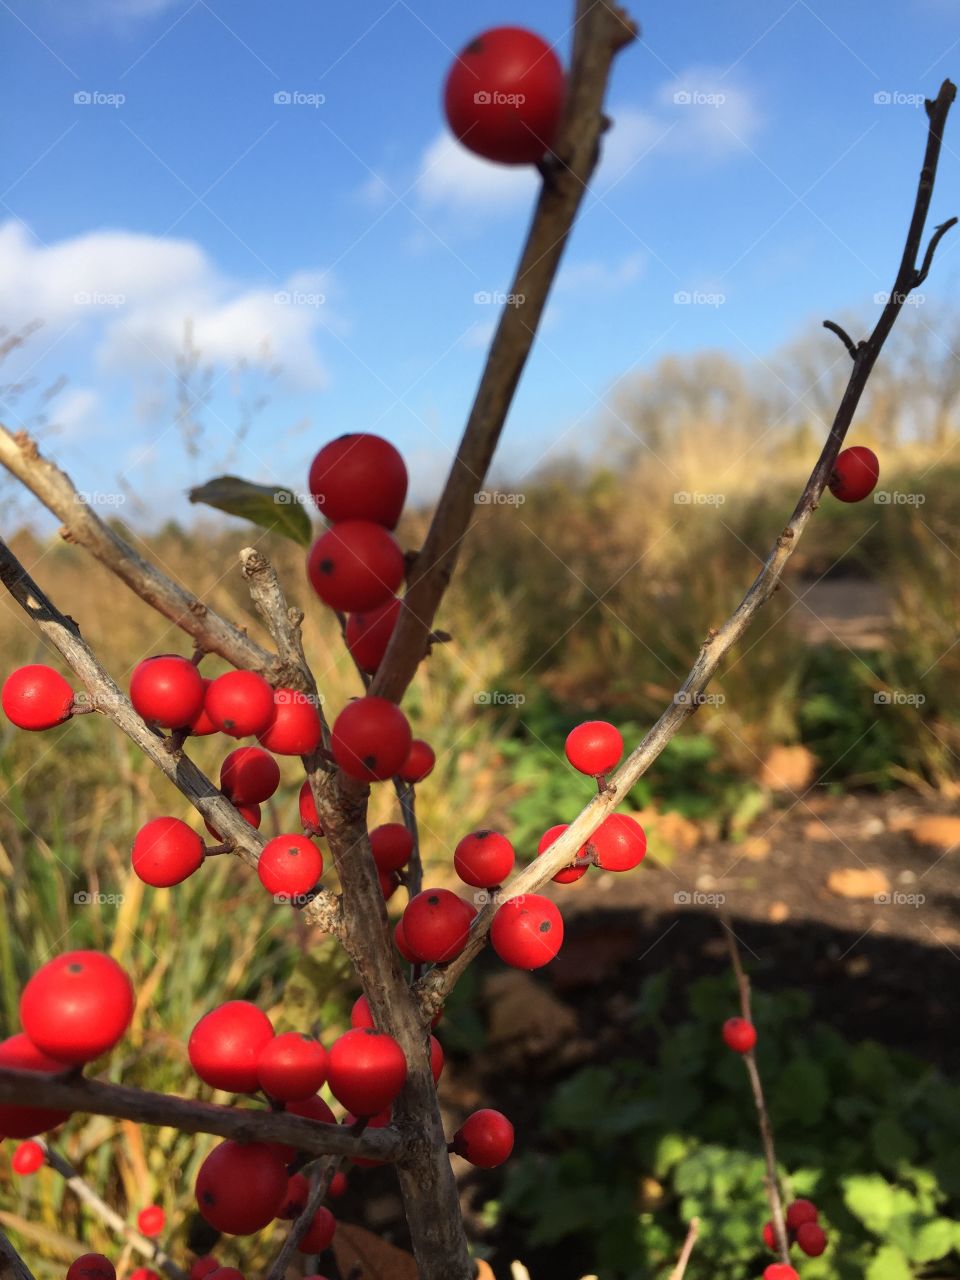 Closeup of red berries on twigs